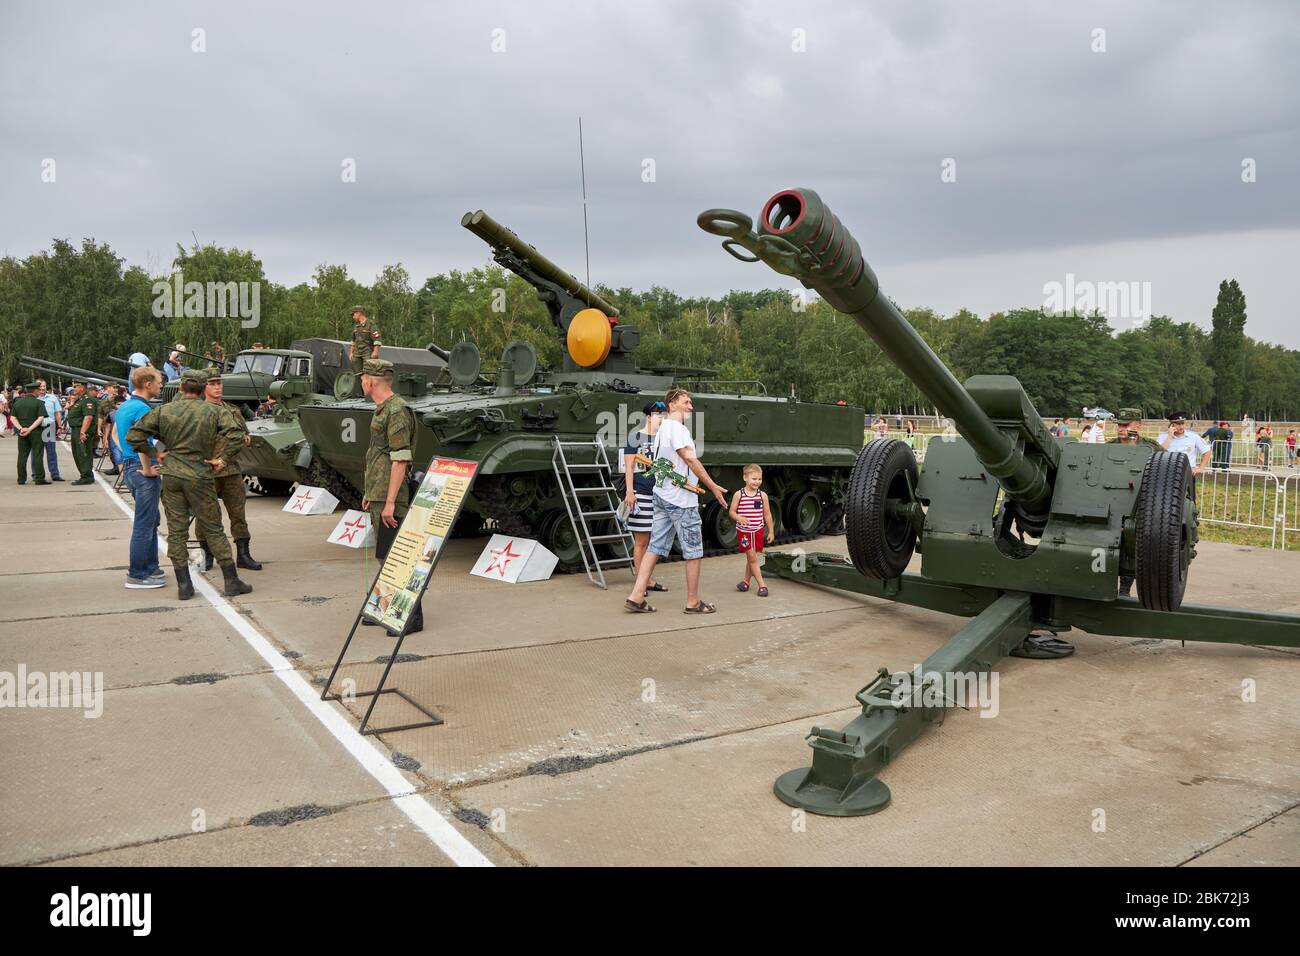 Sambek, Rostov Region, Russia, June 28, 2019: Visitors to the exhibition explore the 122mm Soviet howitzer D-30A GRAU index 2A18 Stock Photo